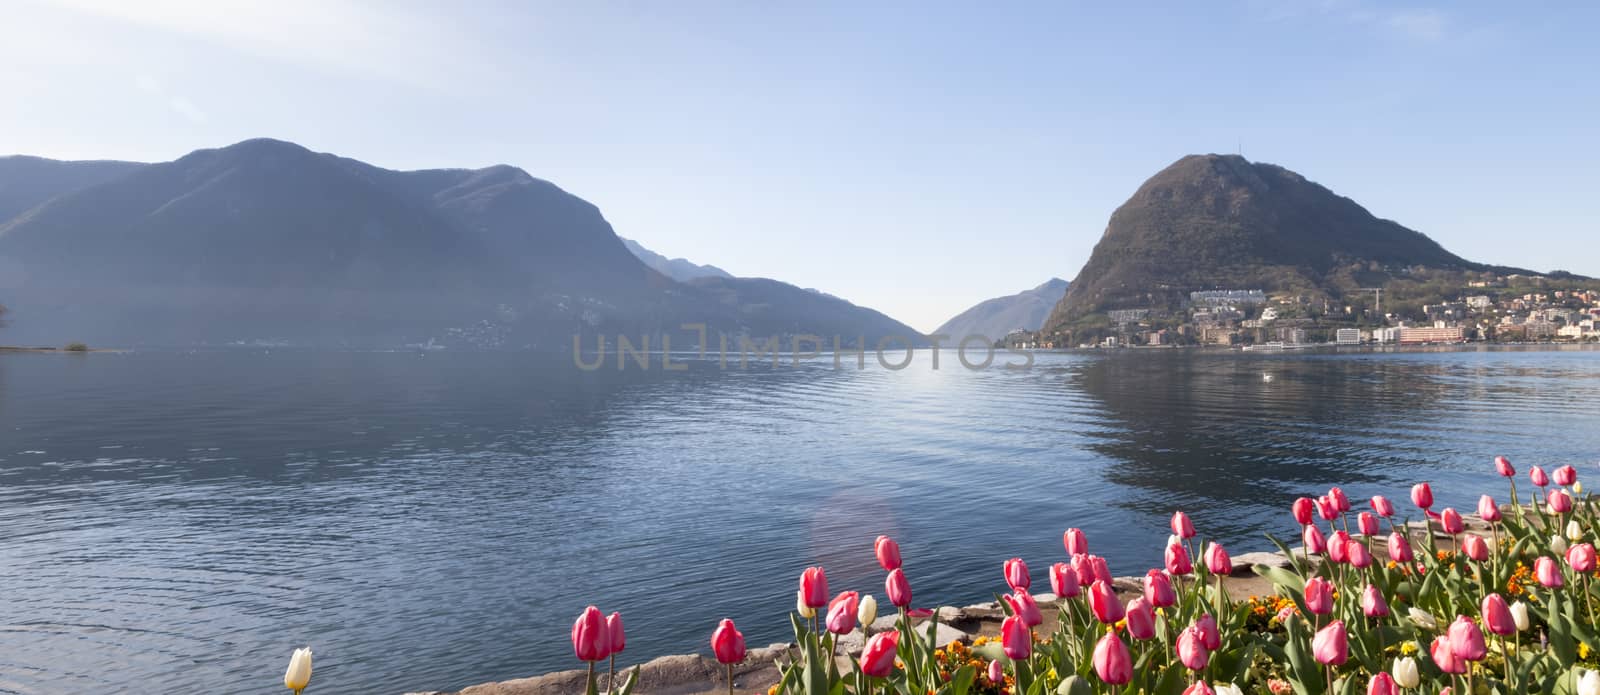 Lugano, Switzerland: Parco Ciani, city garden with fresh flowers of the current season. Intense color of flowers on a fine spring day.